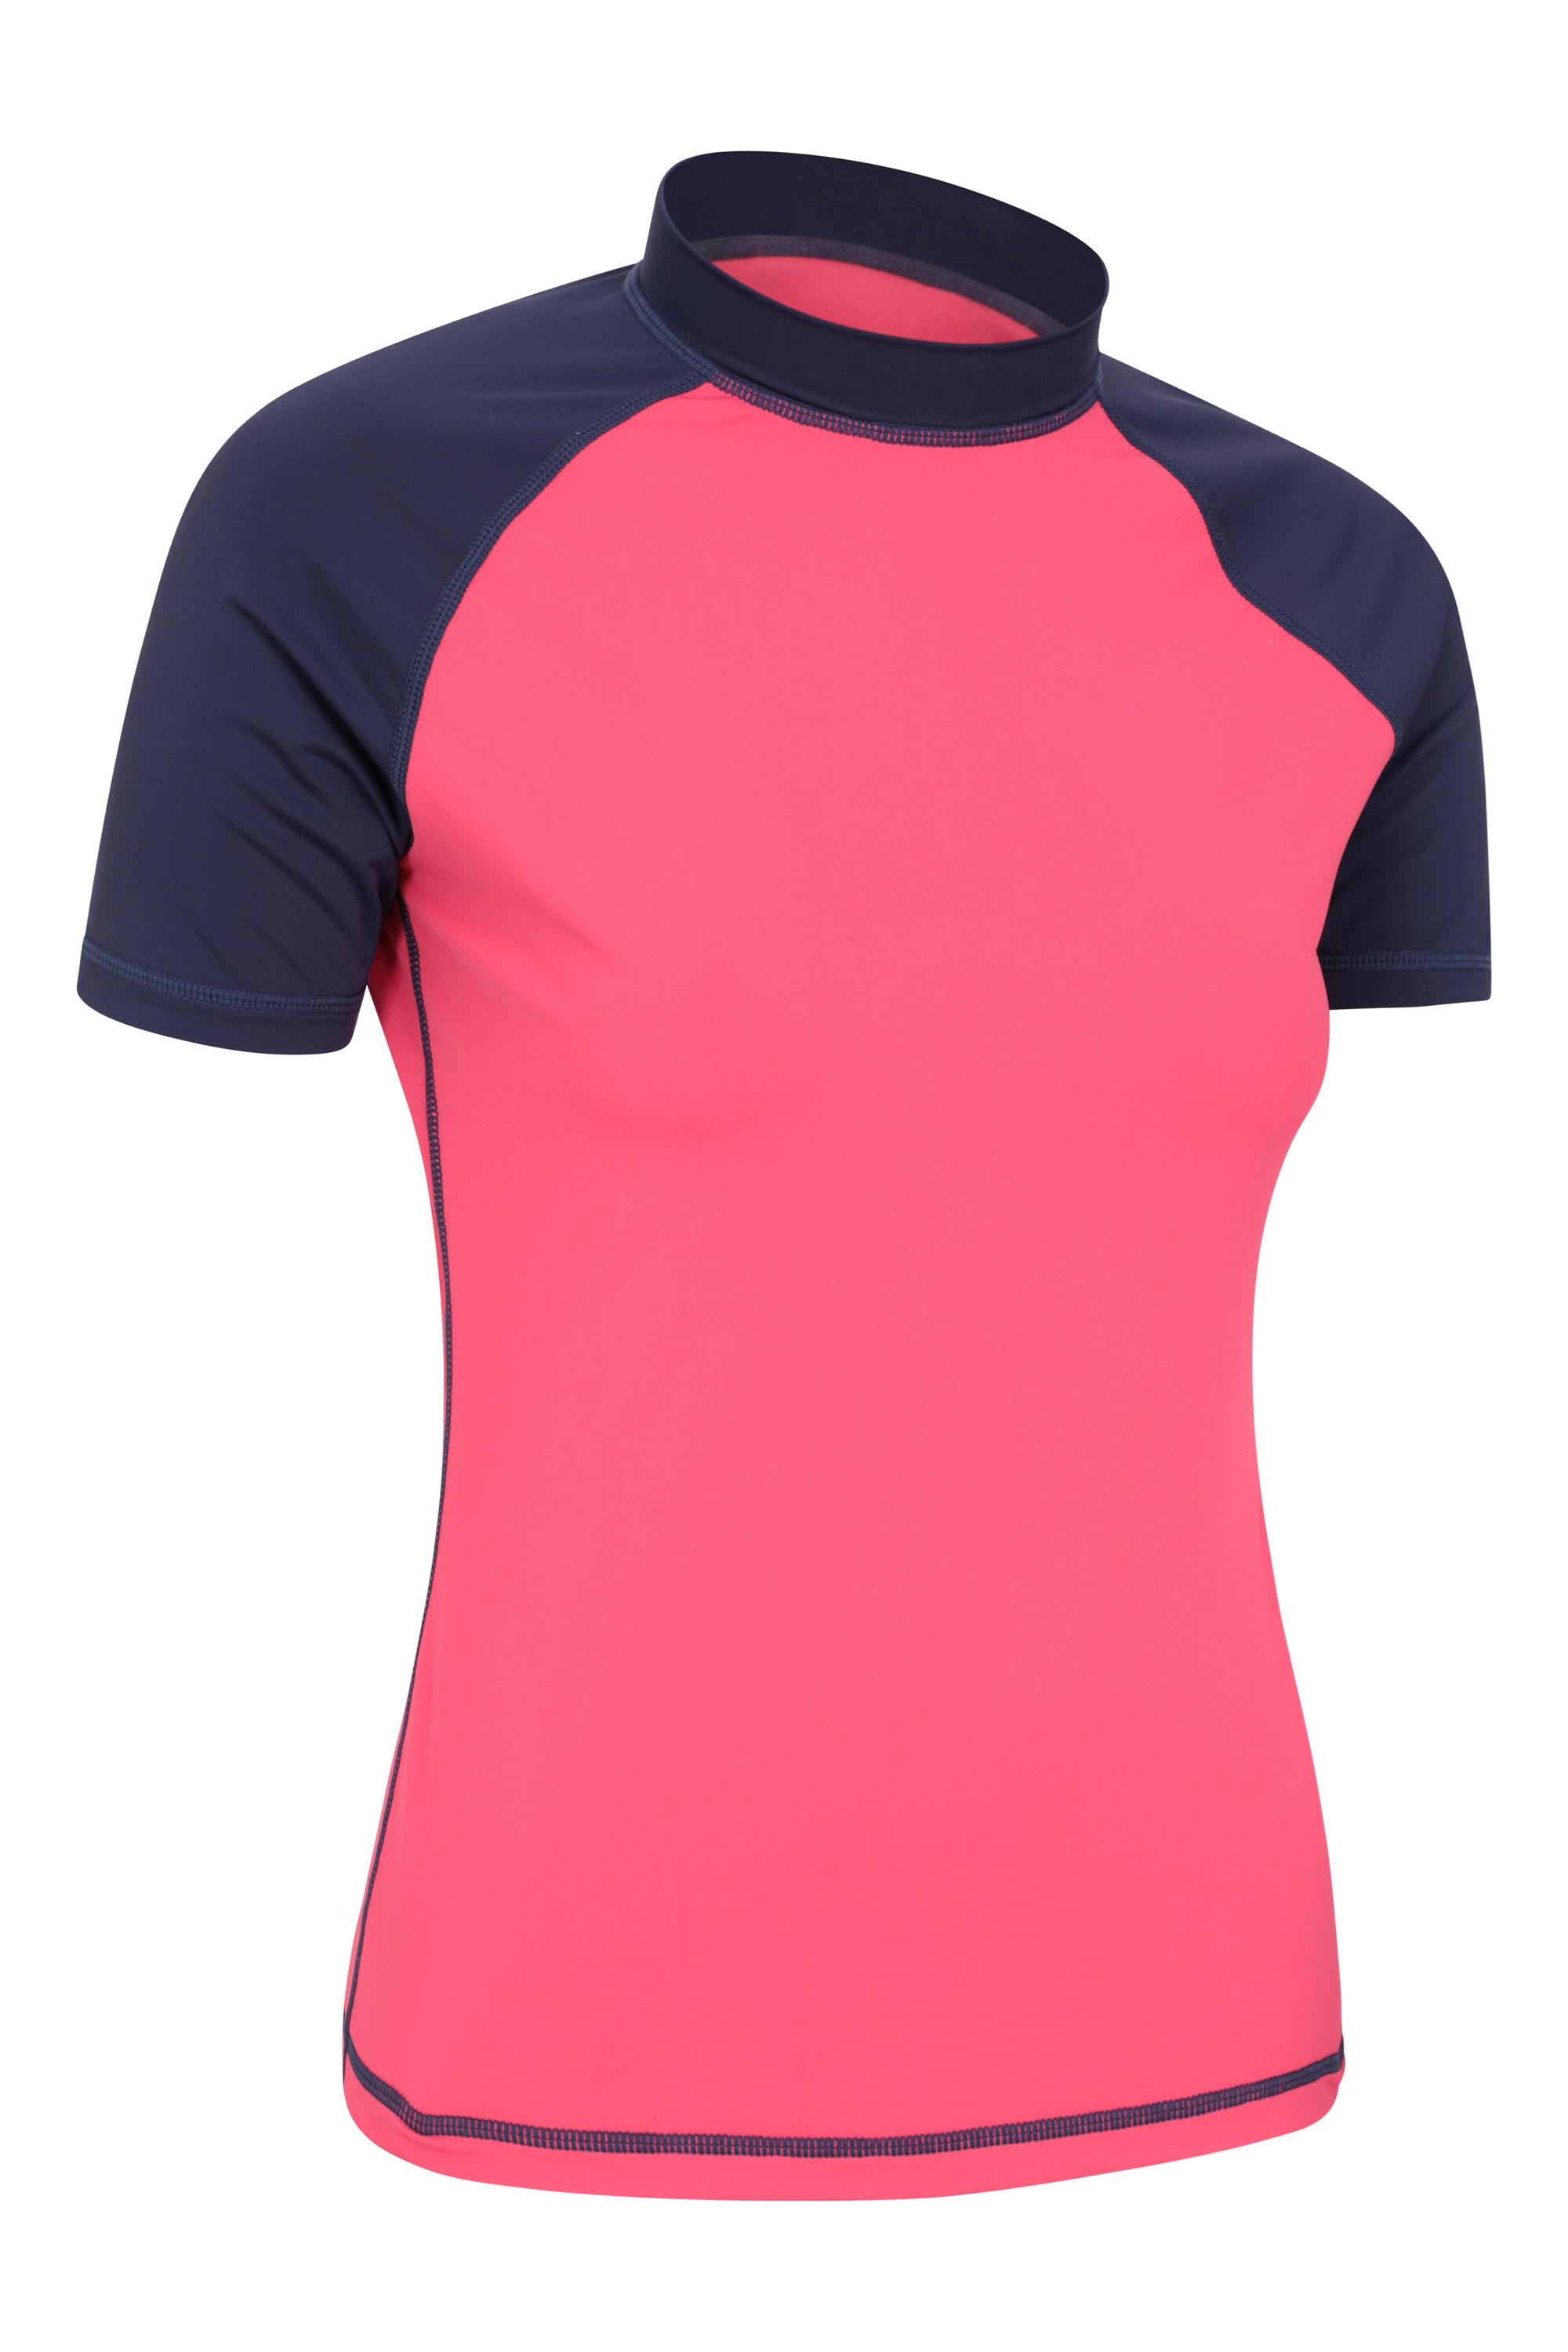 Quick Dry Outdoors or Under a Wetsuit for Swimming Flat Seams Summer Top Mountain Warehouse Womens Short Sleeve UV Rash Vest with Zip Neck UPF50+ Ladies Rash Guard 